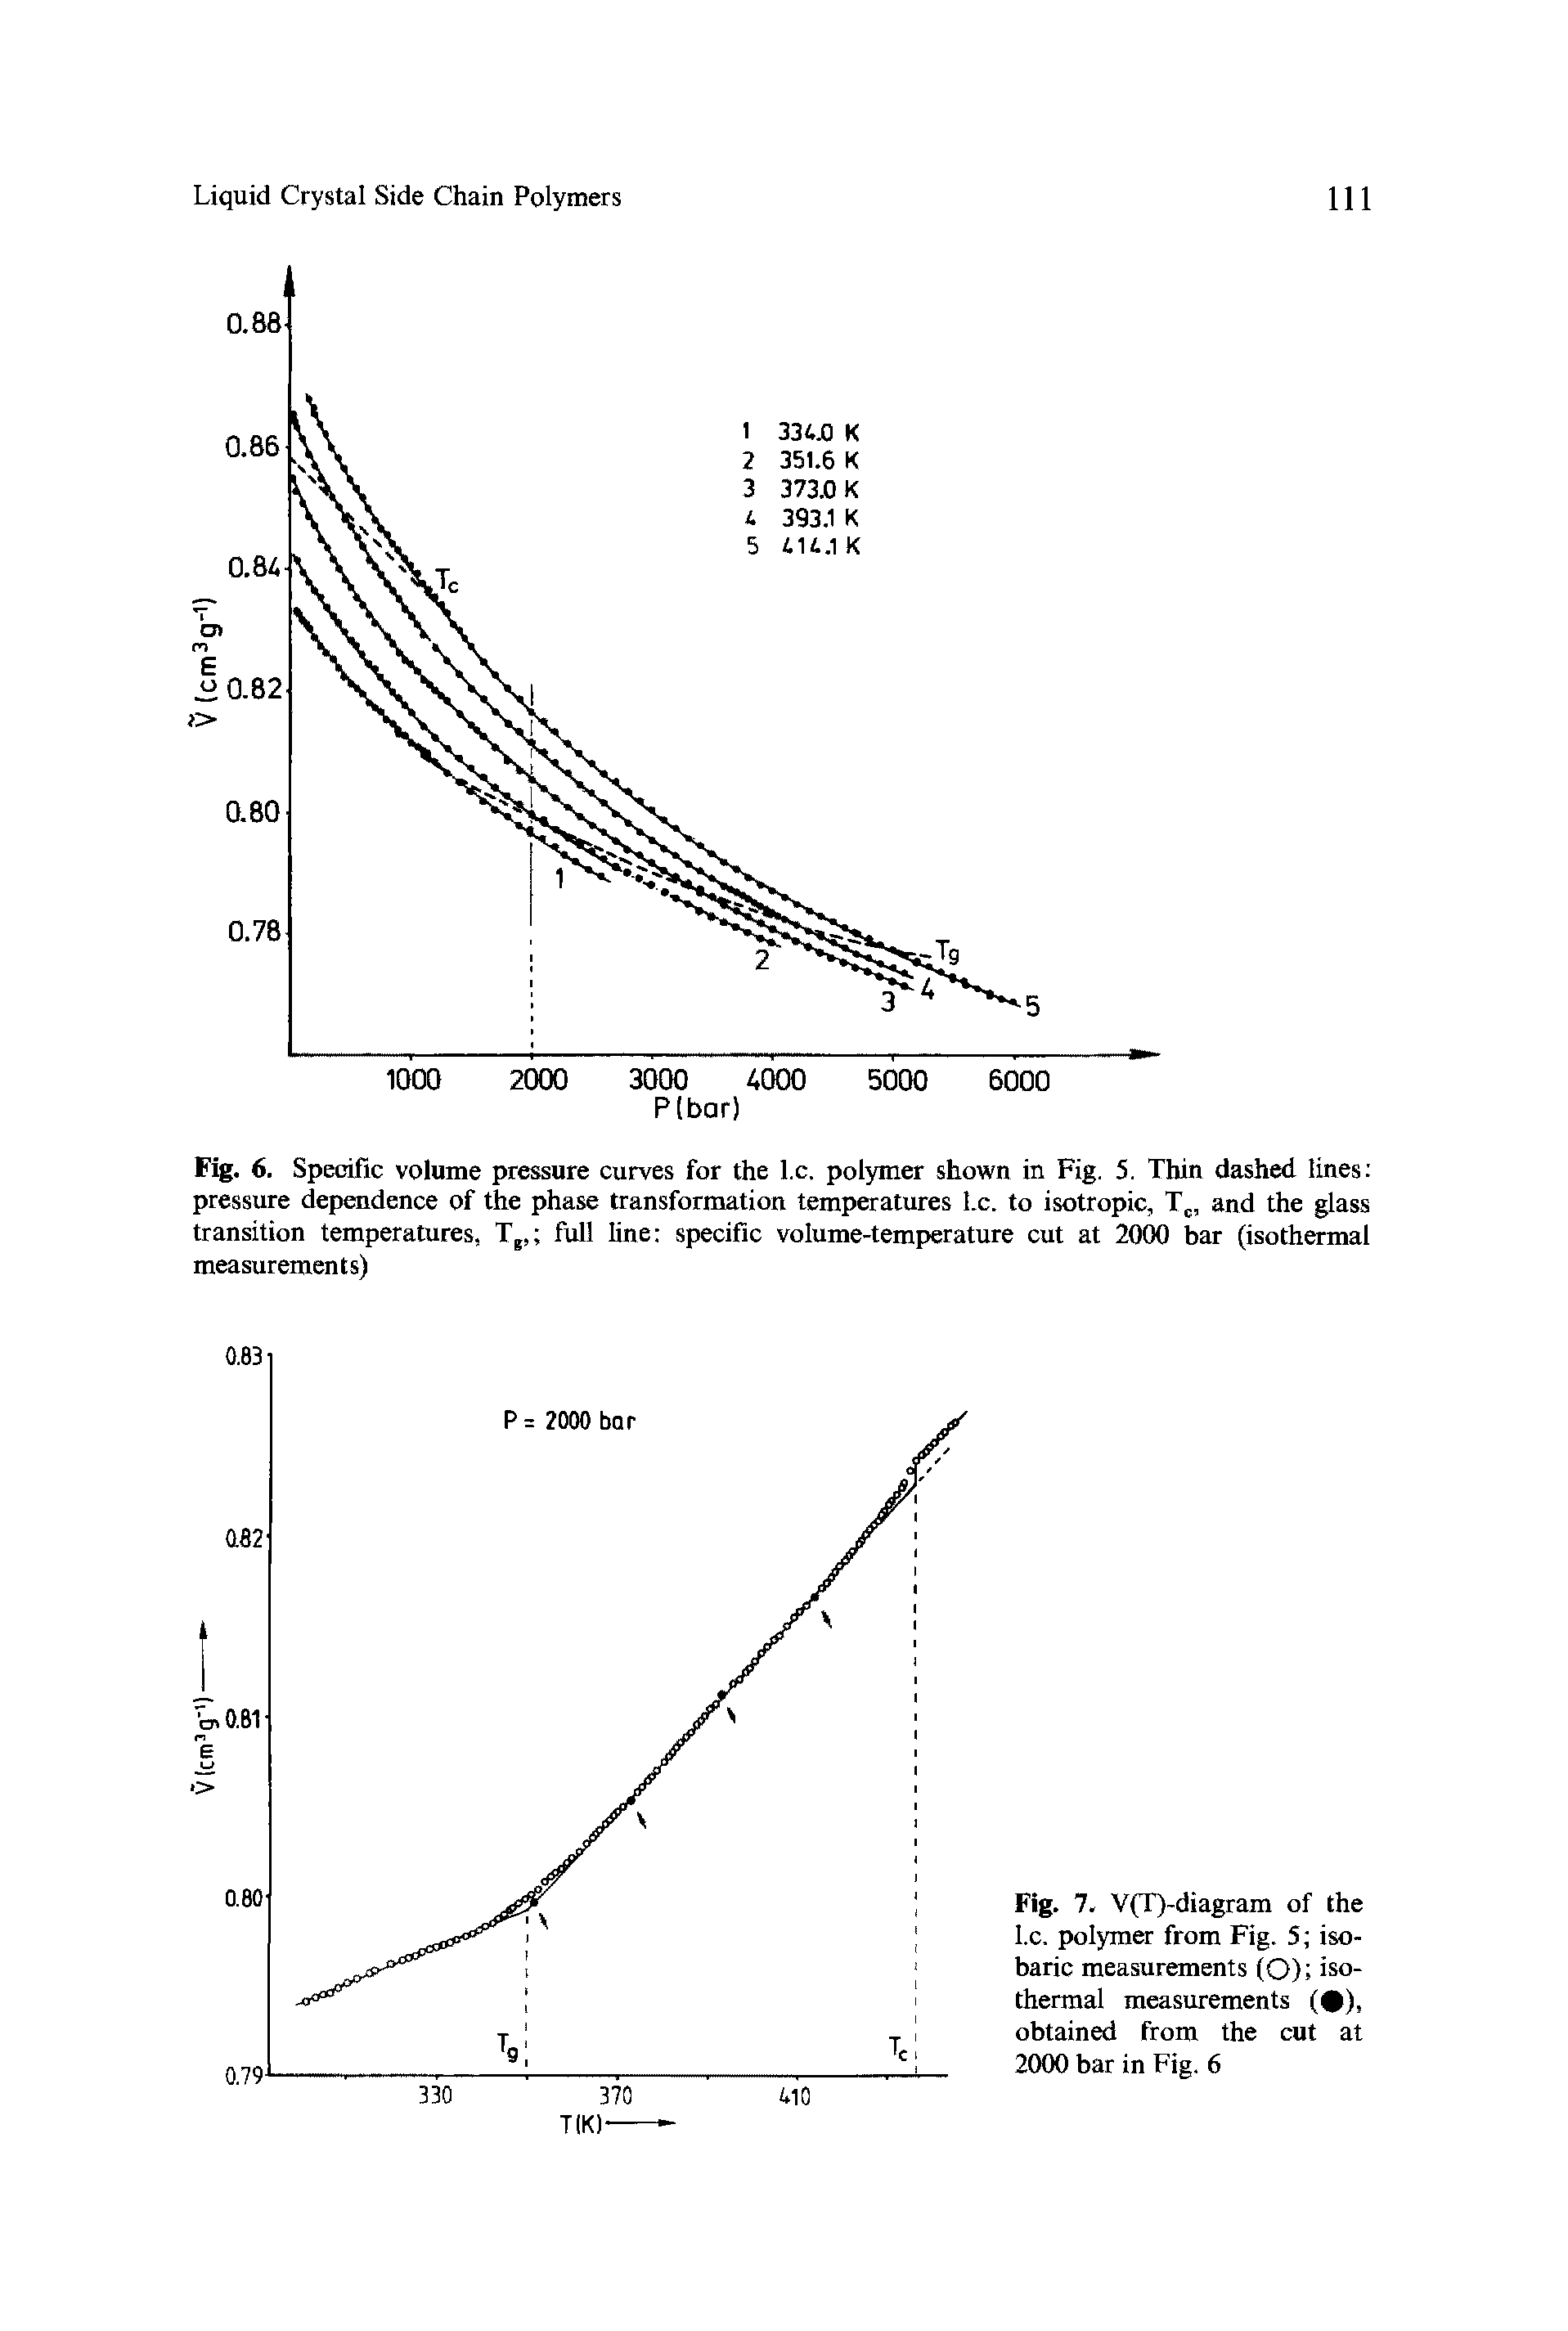 Fig. 6. Specific volume pressure curves for the l.c. polymer shown in Fig. 5. Thin dashed lines pressure dependence of the phase transformation temperatures l.c. to isotropic, Tc, and the glass transition temperatures, T , full line specific volume-temperature cut at 2000 bar (isothermal measurements)...